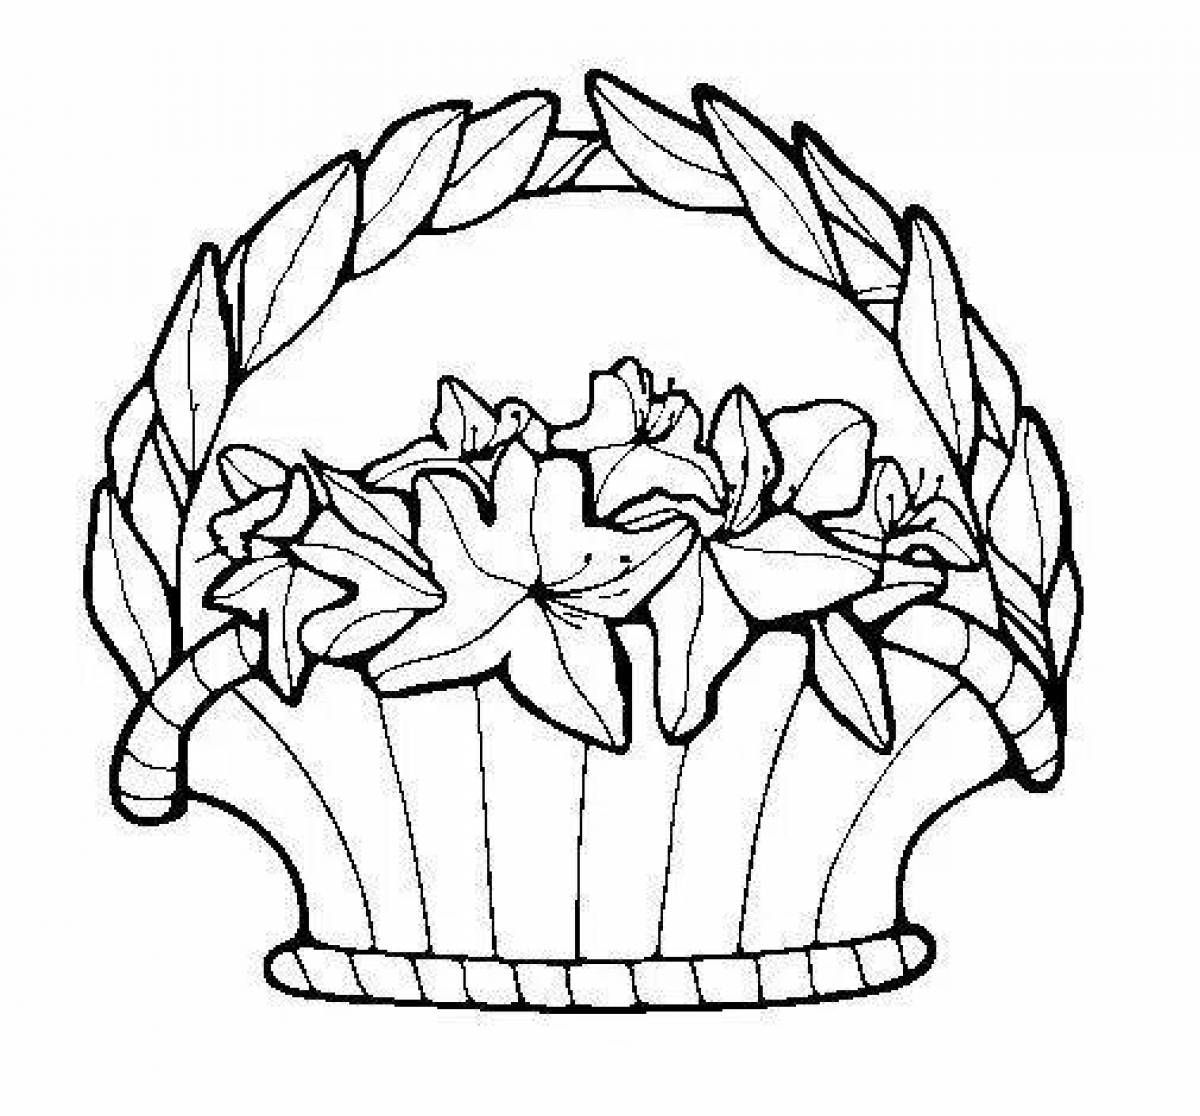 Coloring book shining basket of flowers